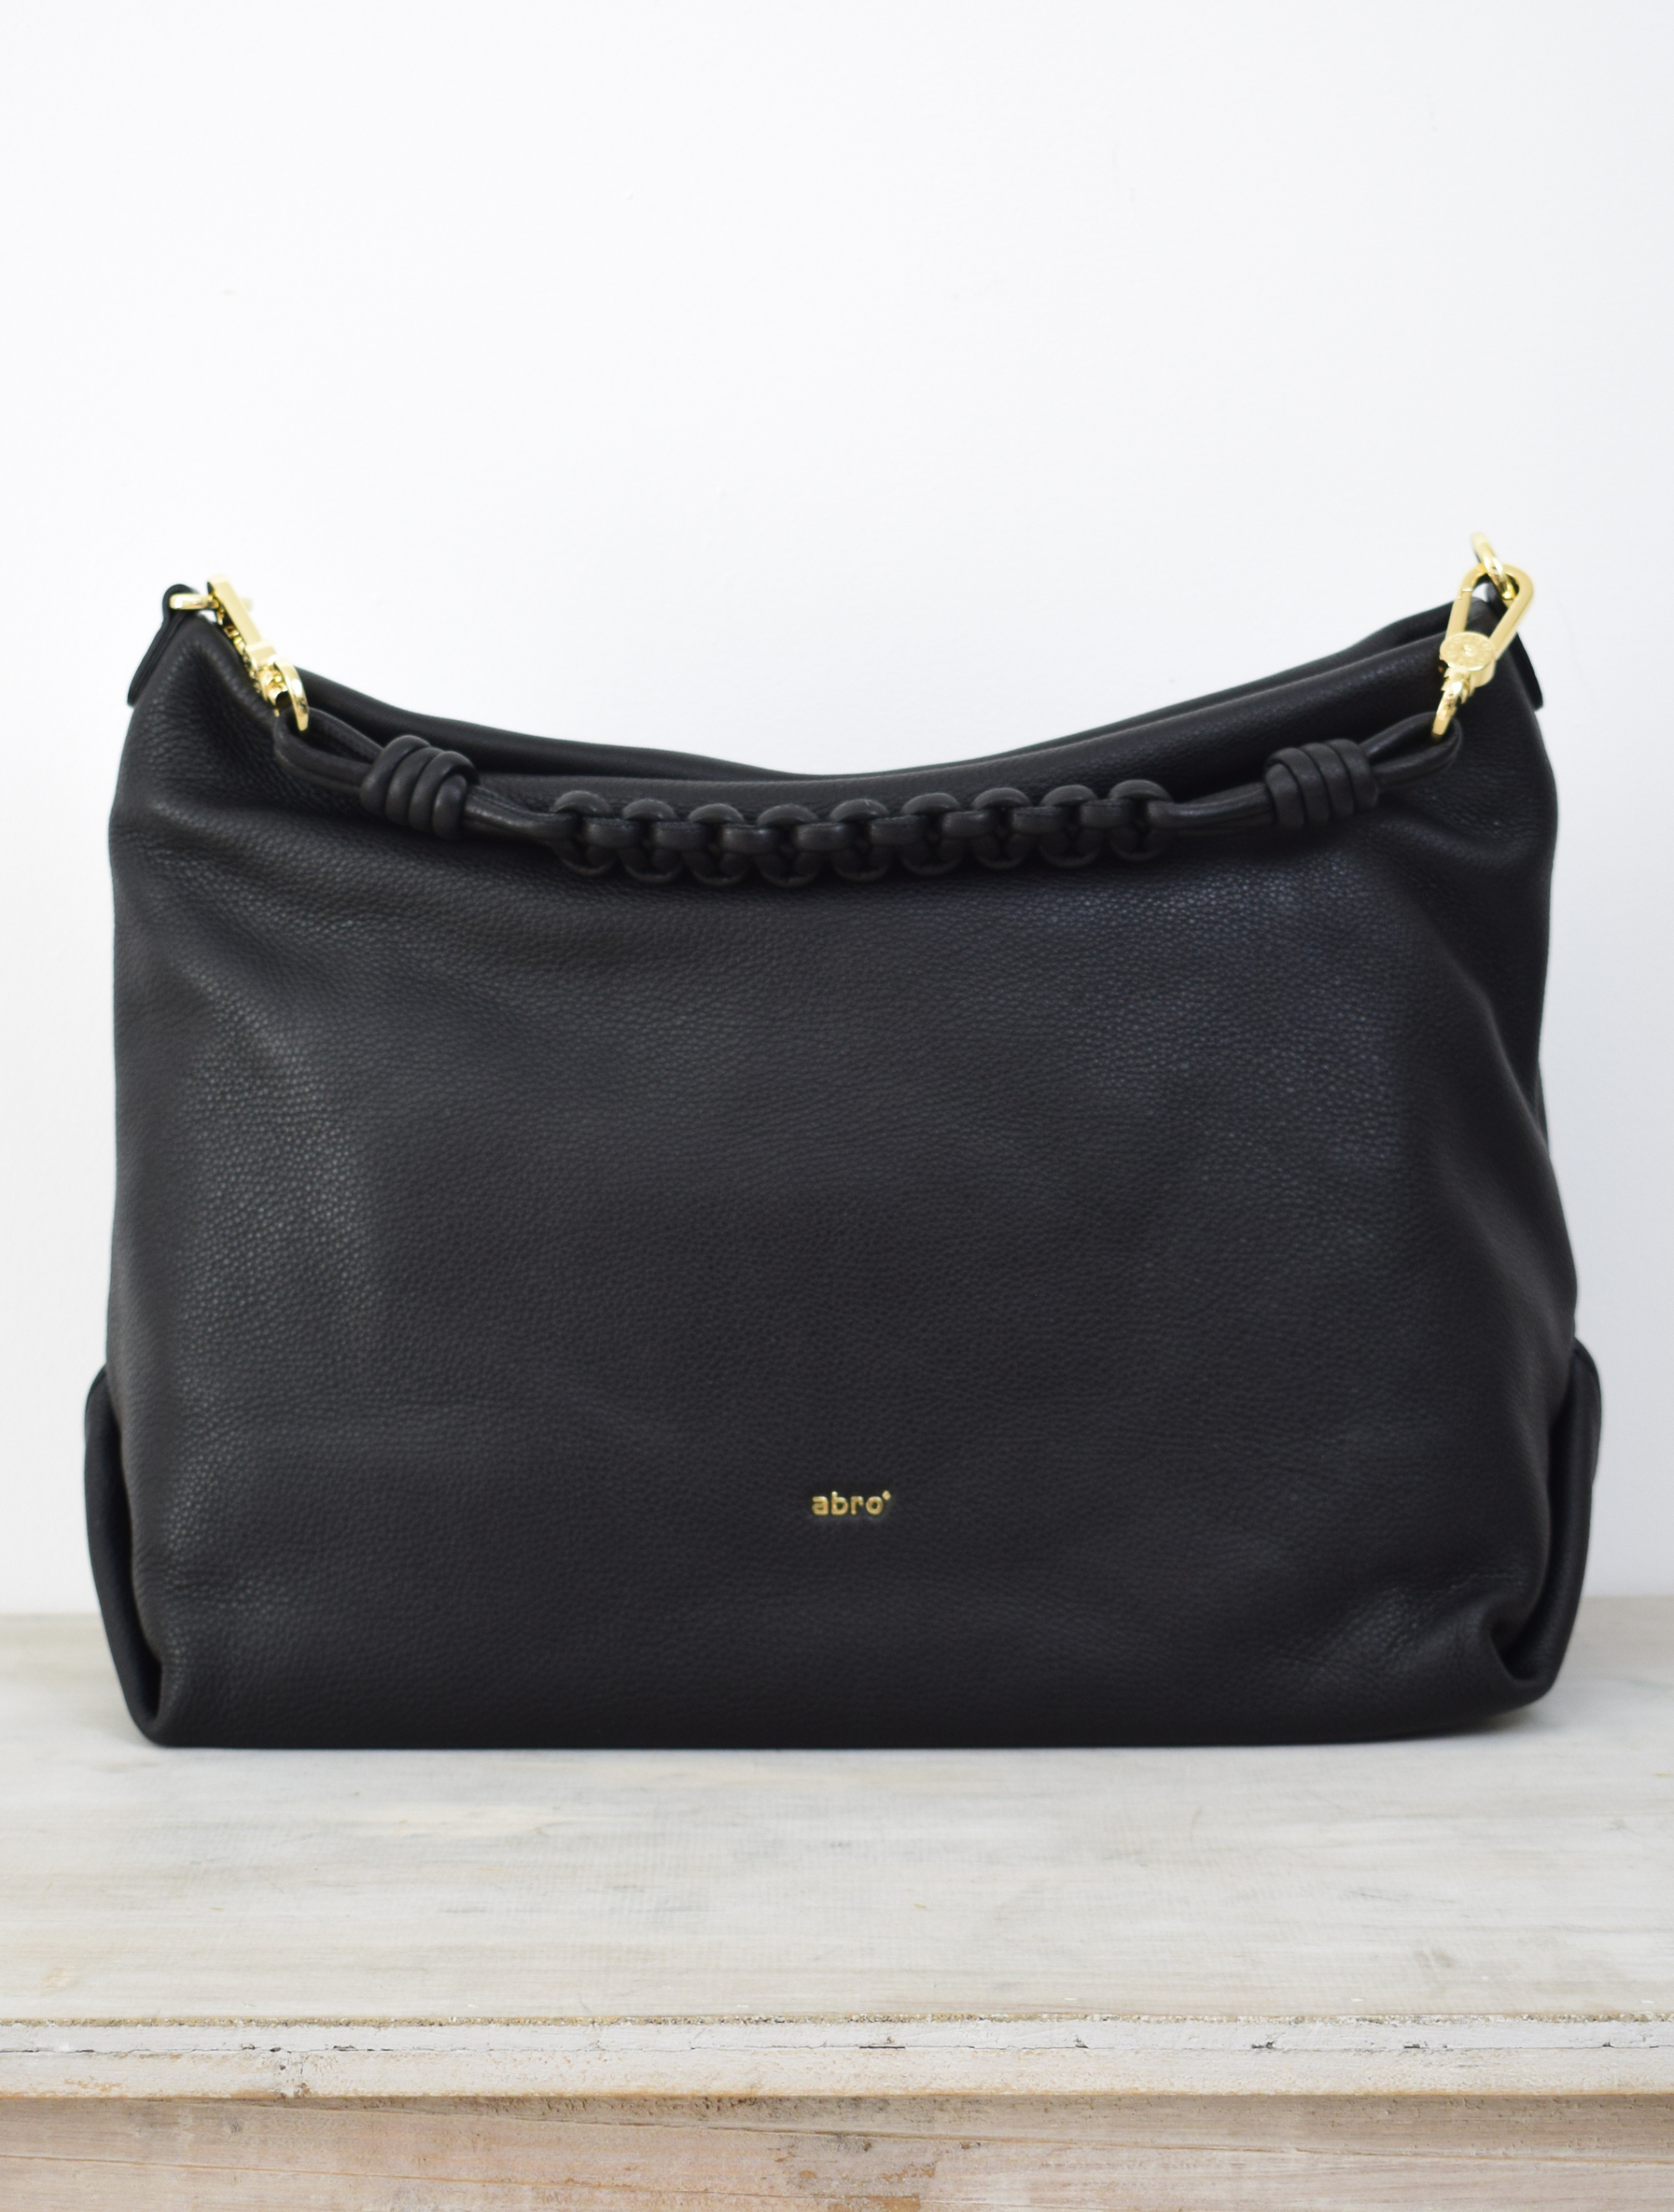 Italian black leather bag with a woven shoulder strap and cross body strap with gold toned hardwear